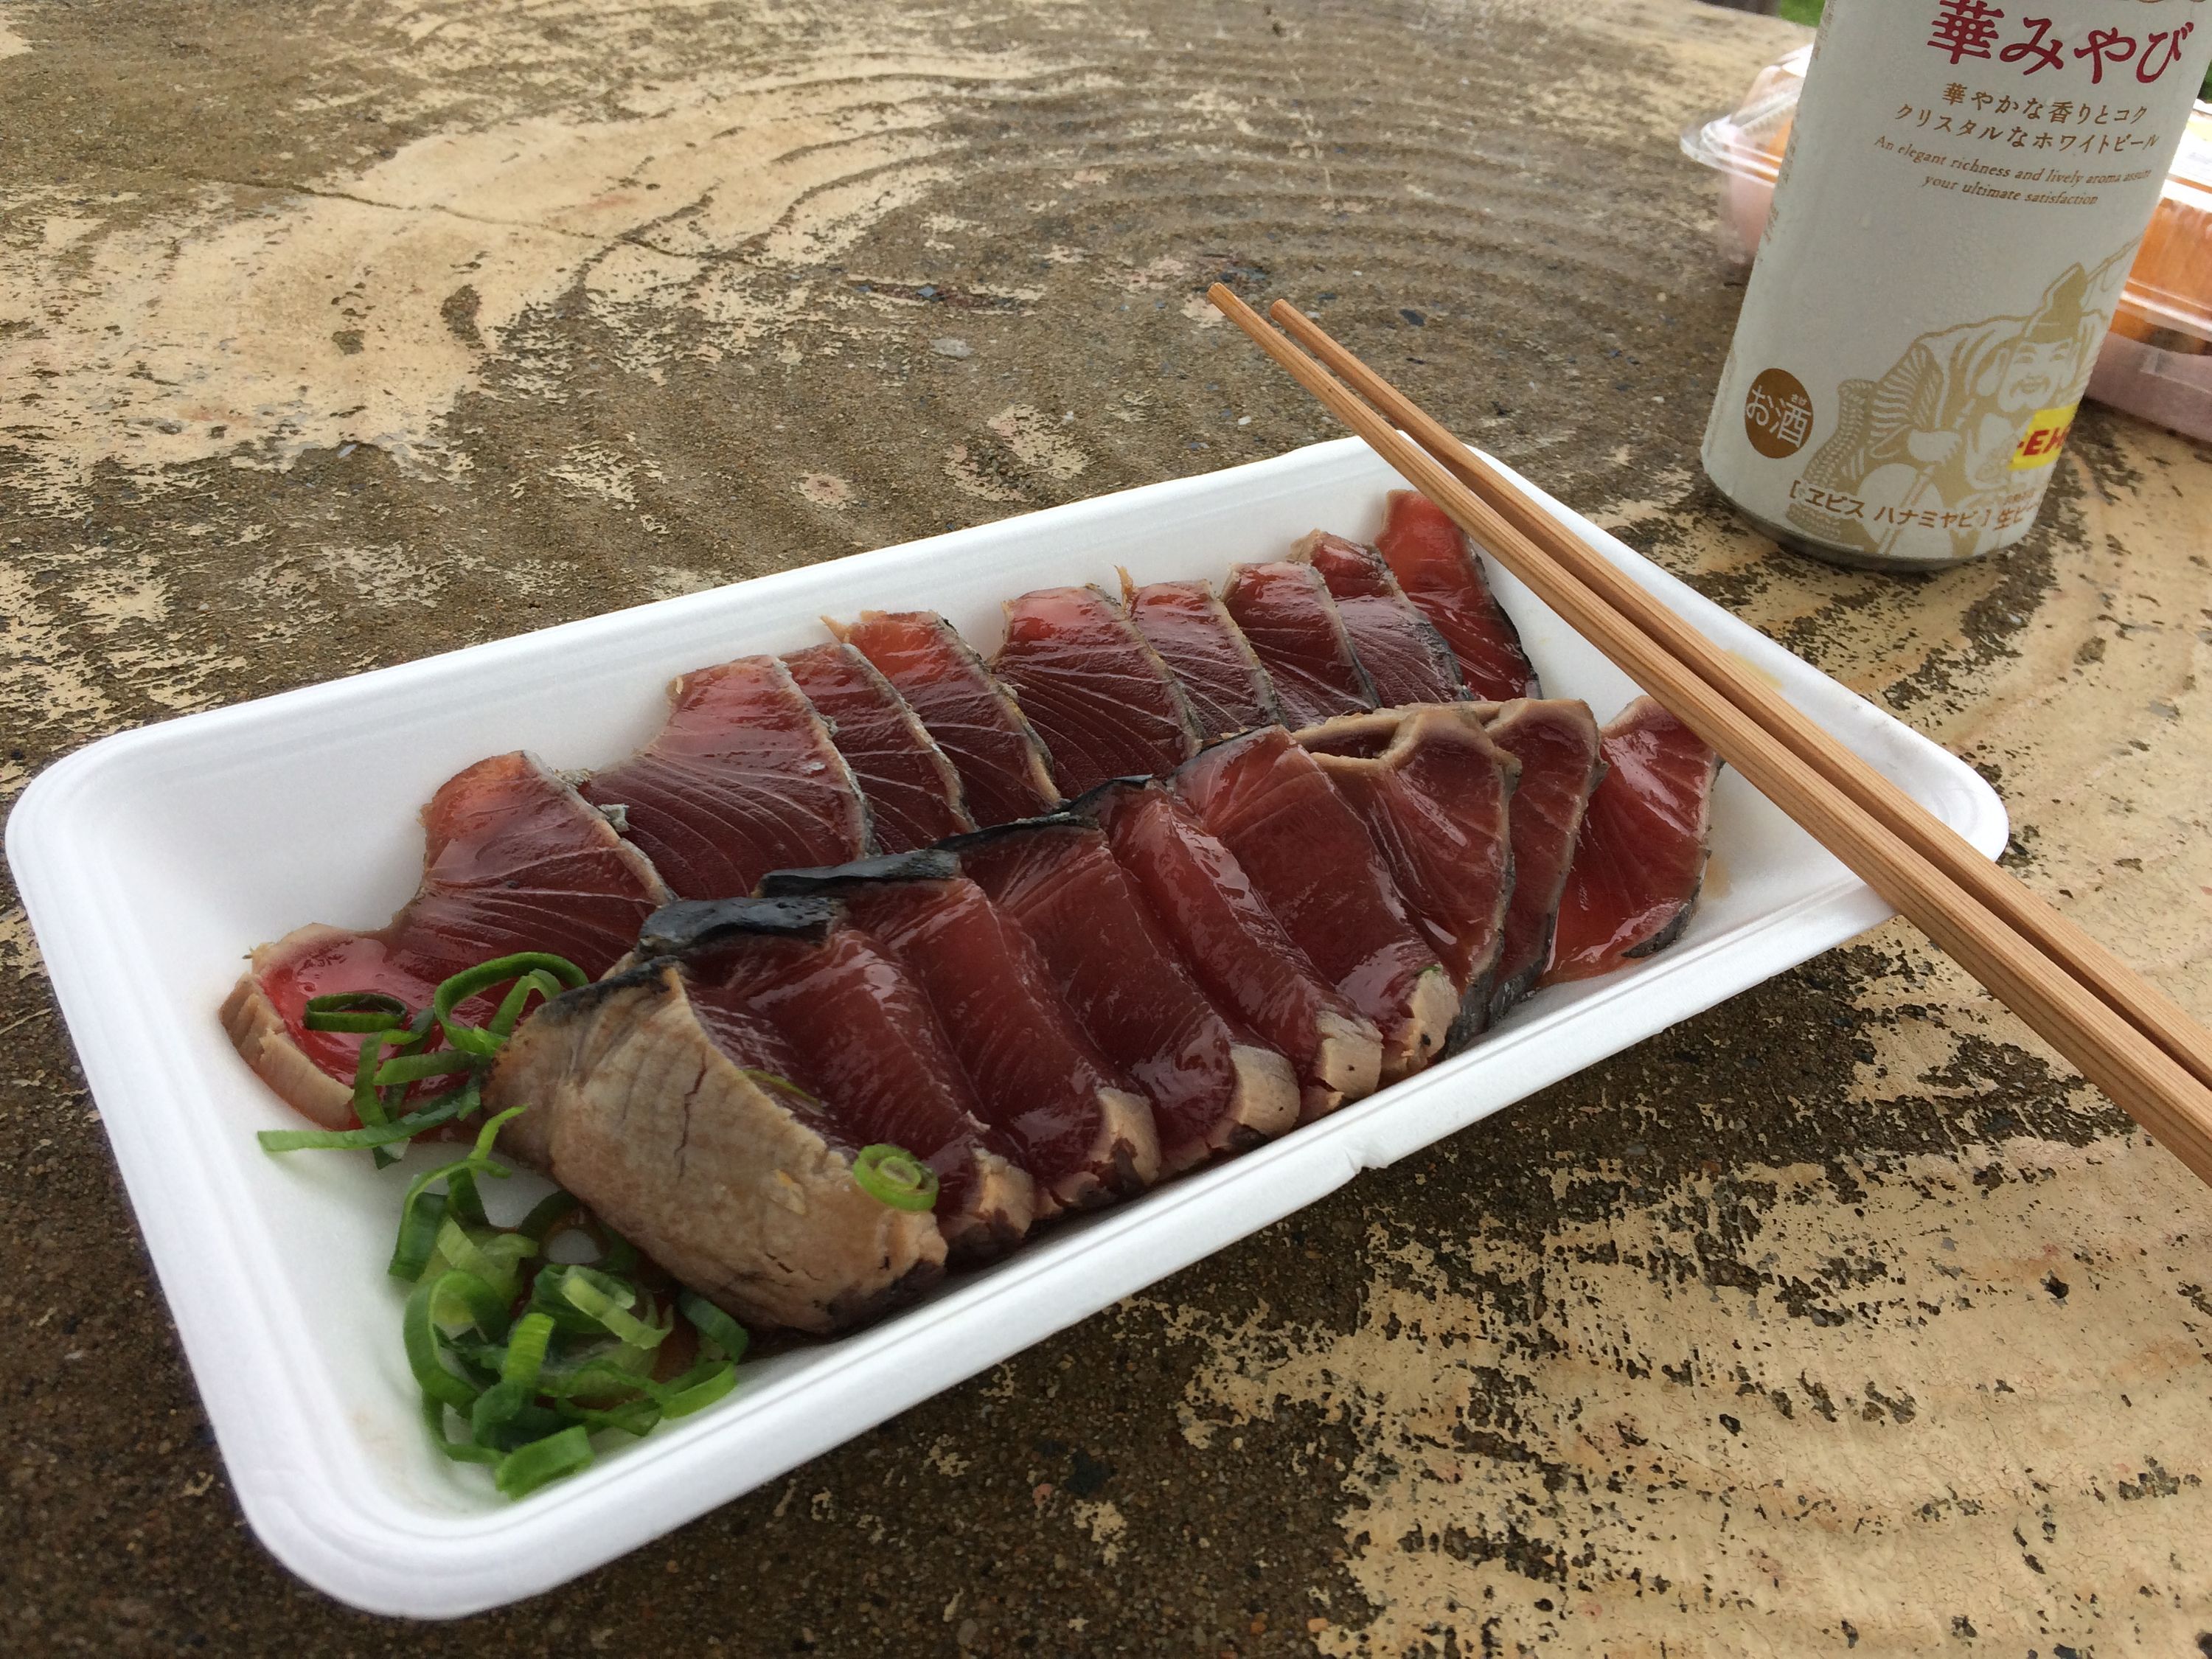 A plate of raw skipjack tuna and a can of beer on an outside table.